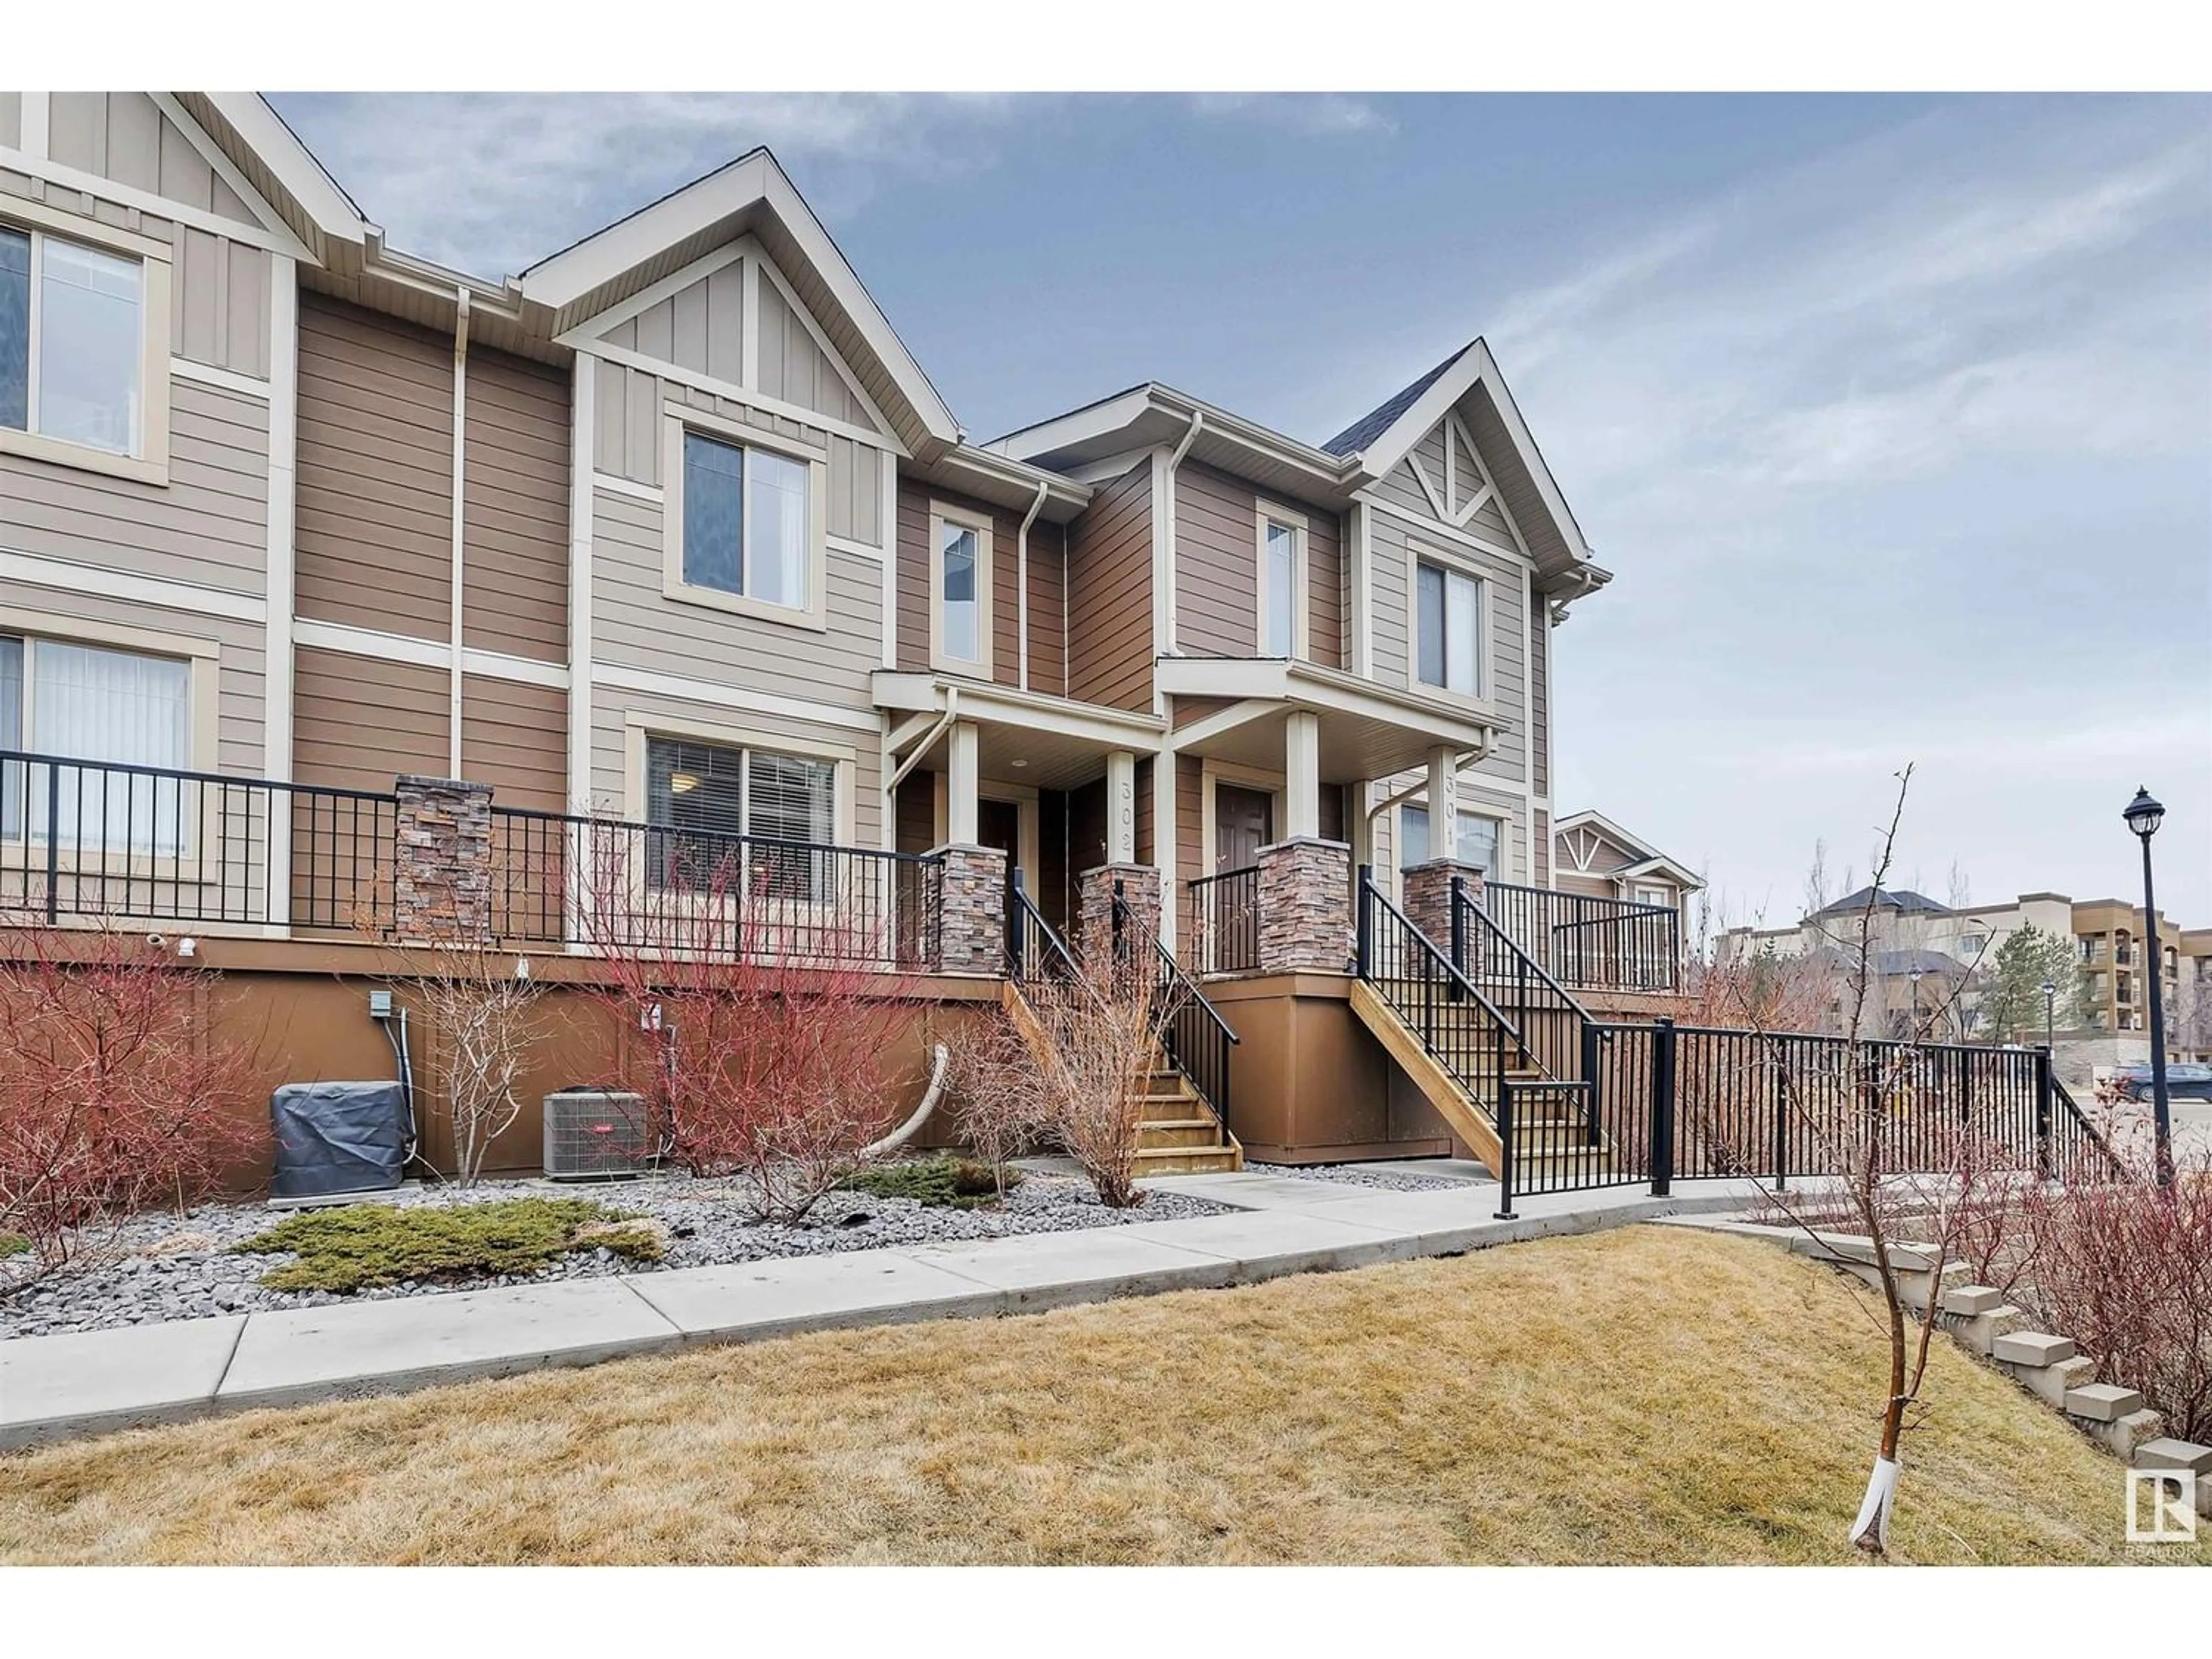 A pic from exterior of the house or condo for #302 401 PALISADES WY, Sherwood Park Alberta T8H0R7